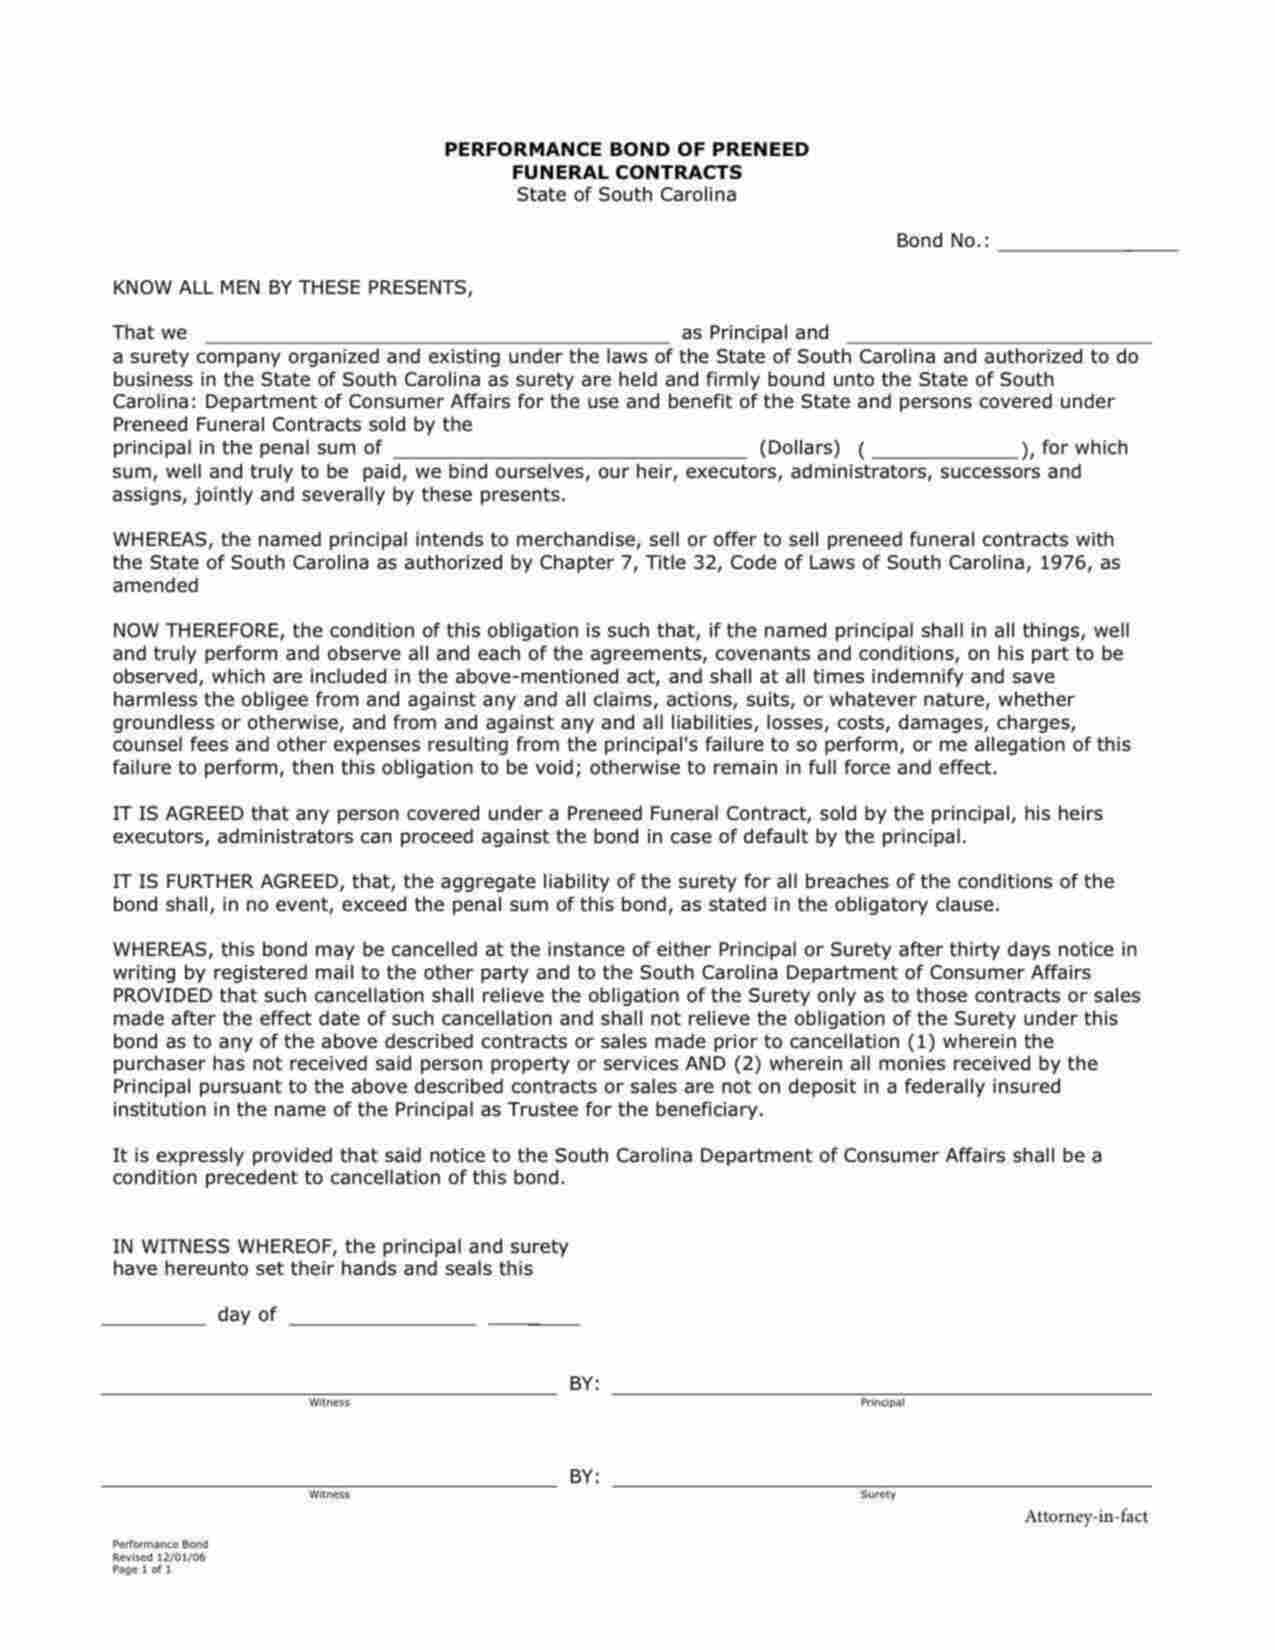 South Carolina Preneed Funeral Contracts Bond Form